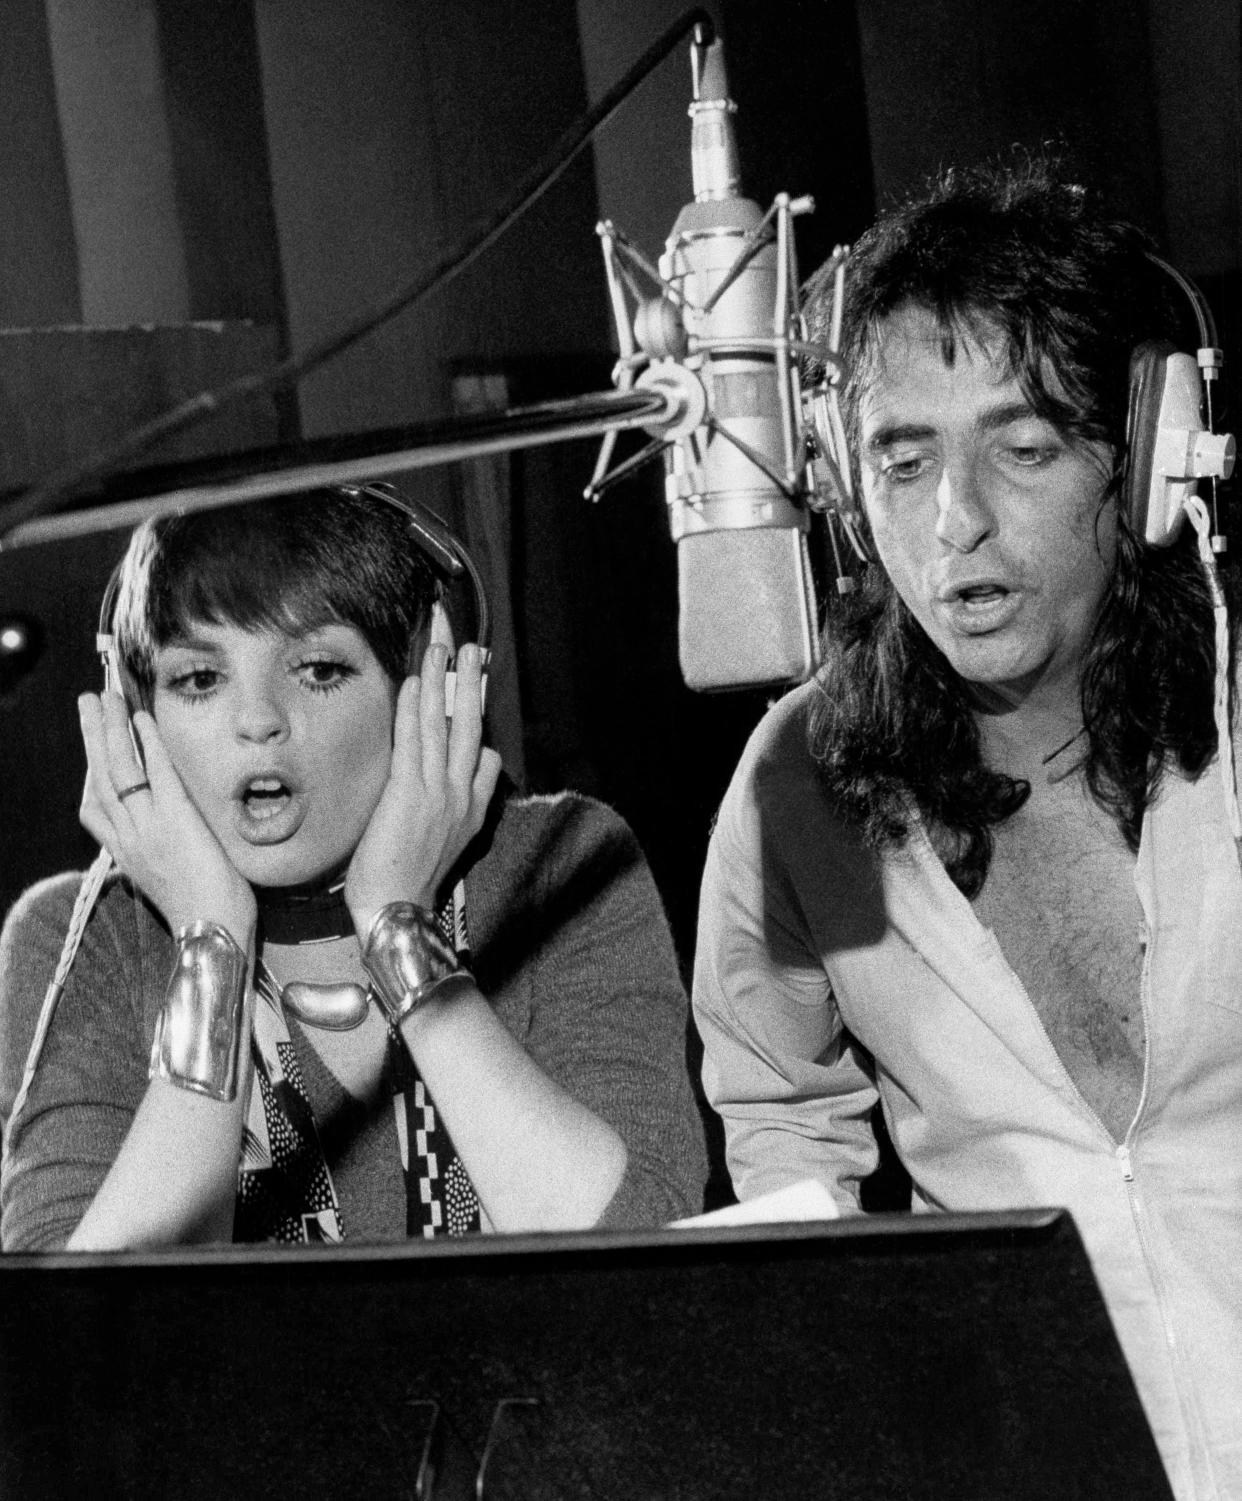 Entertainer Liza Minnelli, left, sings with rock star Alice Cooper  Wednesday, Oct. 4, 1973 in a New York recording studio. Liza, the daughter of Judy Garland and star of movie “Cabaret”, dropped by to sing backup for a song on Cooper’s new album. (AP Photo/AG)